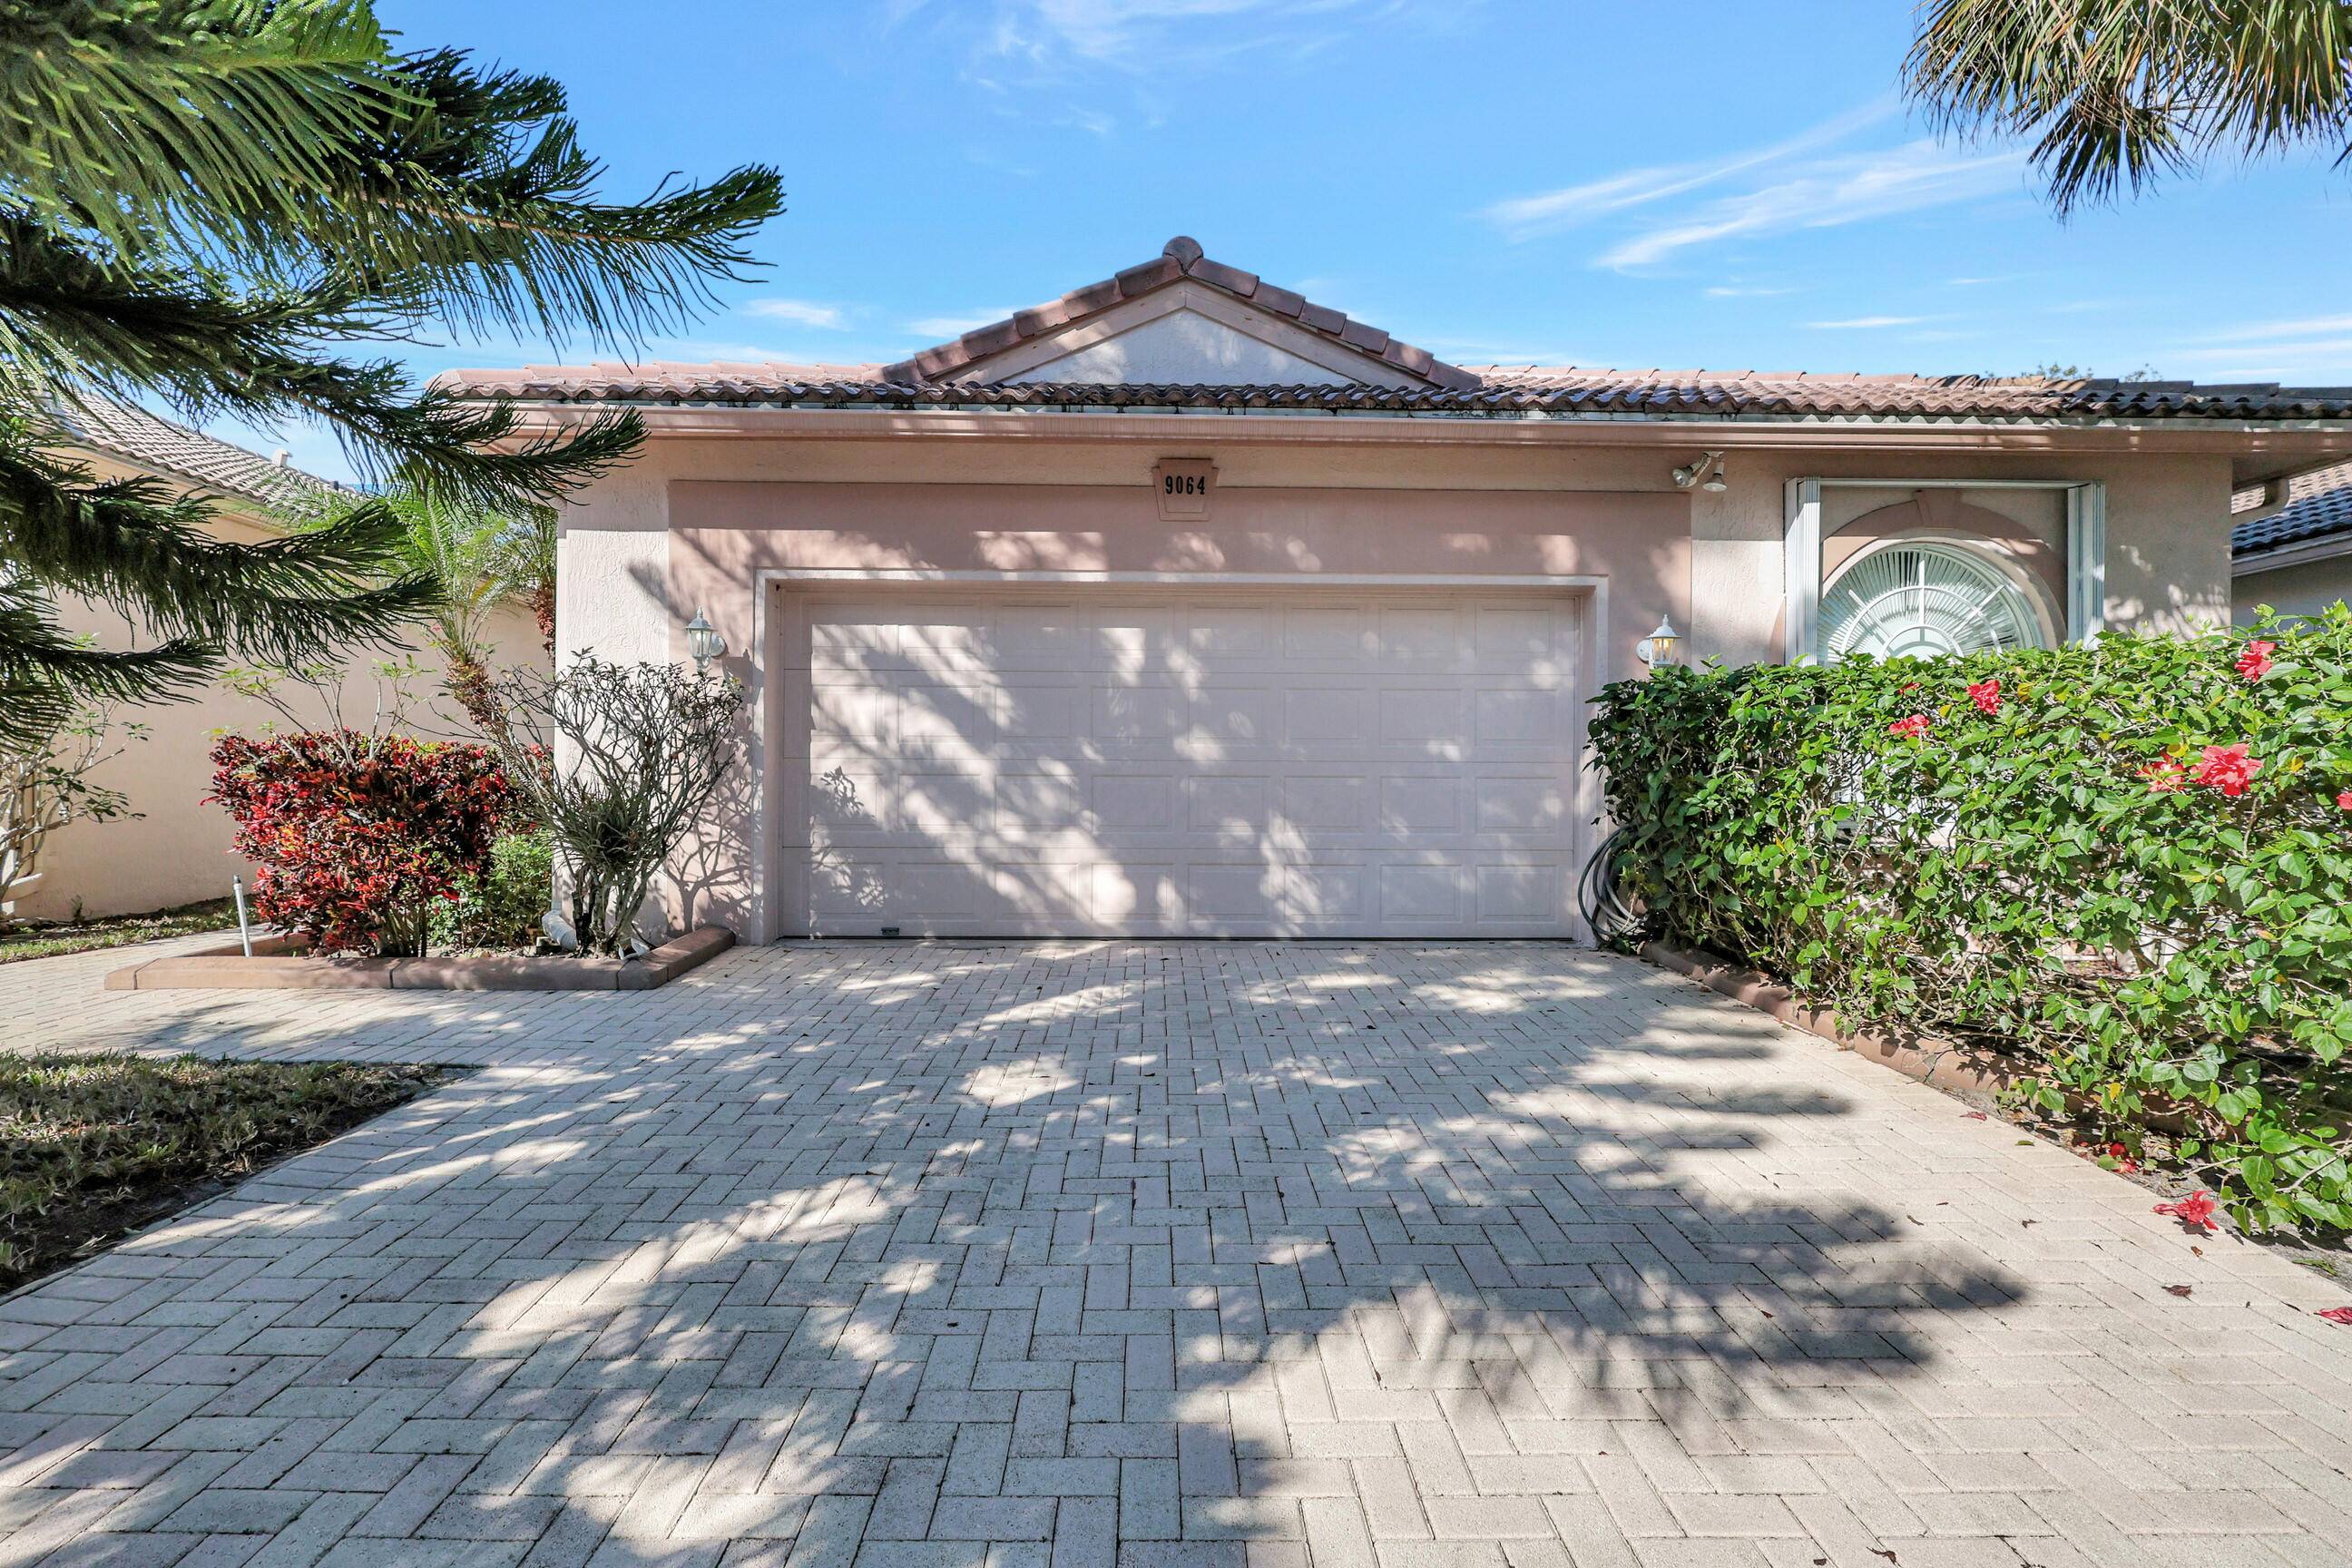 Must see in your search for a new home, located in West Palm Beach's premier 55 resort style community, gated and boasting the areas largest clubhouse and recreational facilities.